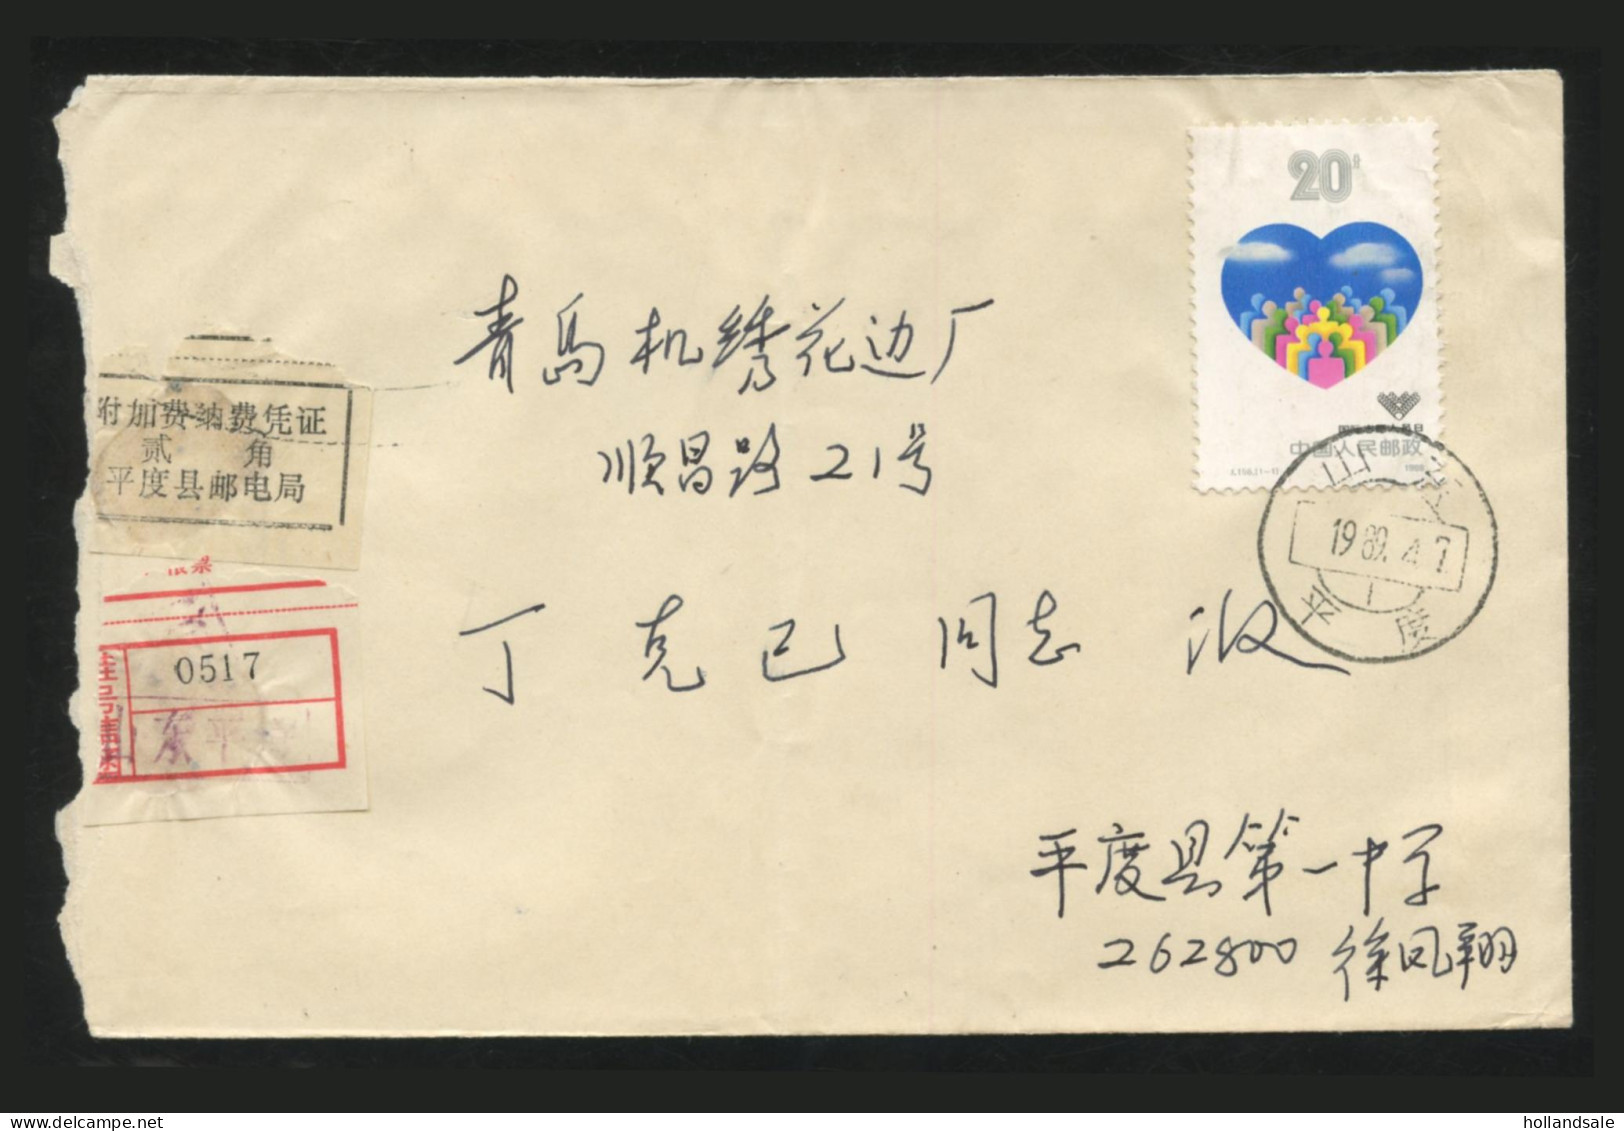 CHINA PRC / ADDED CHARGE - Cover With Label Of Pingdu City, Shandong Prov. PALMER 34:2 - Postage Due